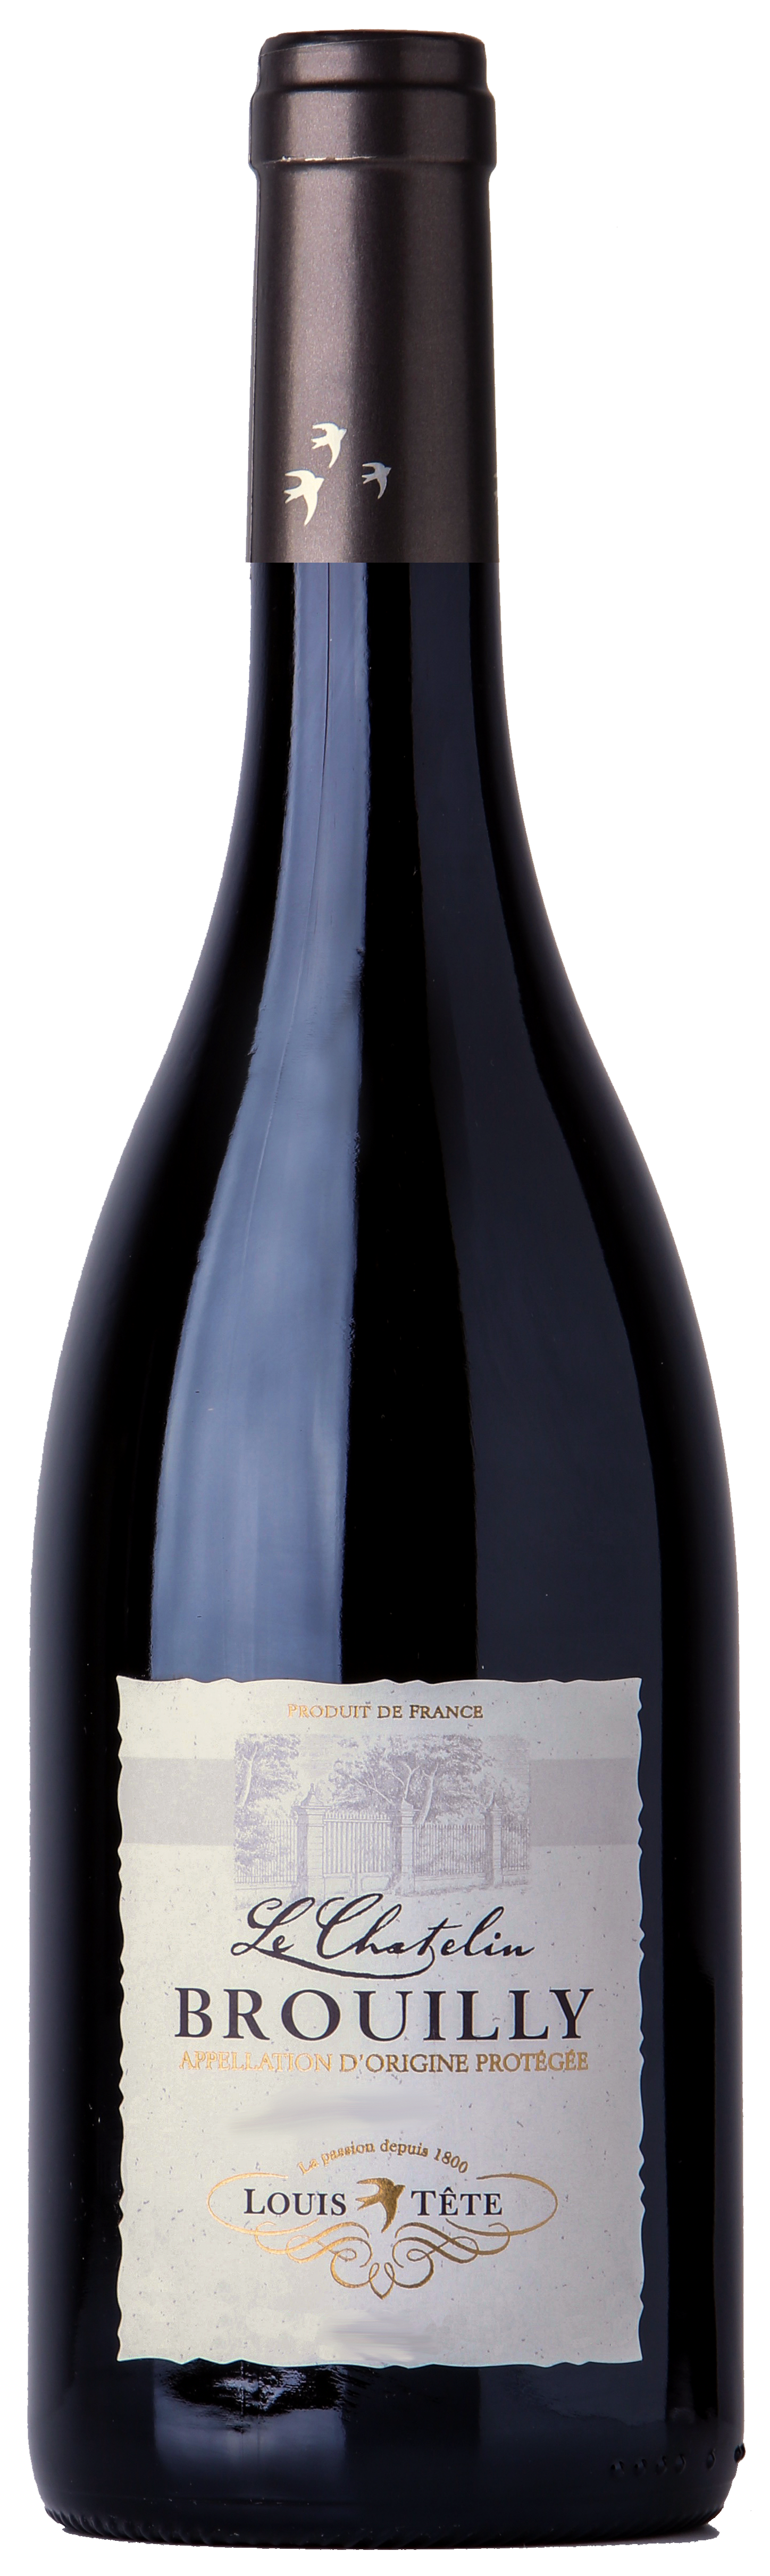 Le Chatelin  Brouilly AOC